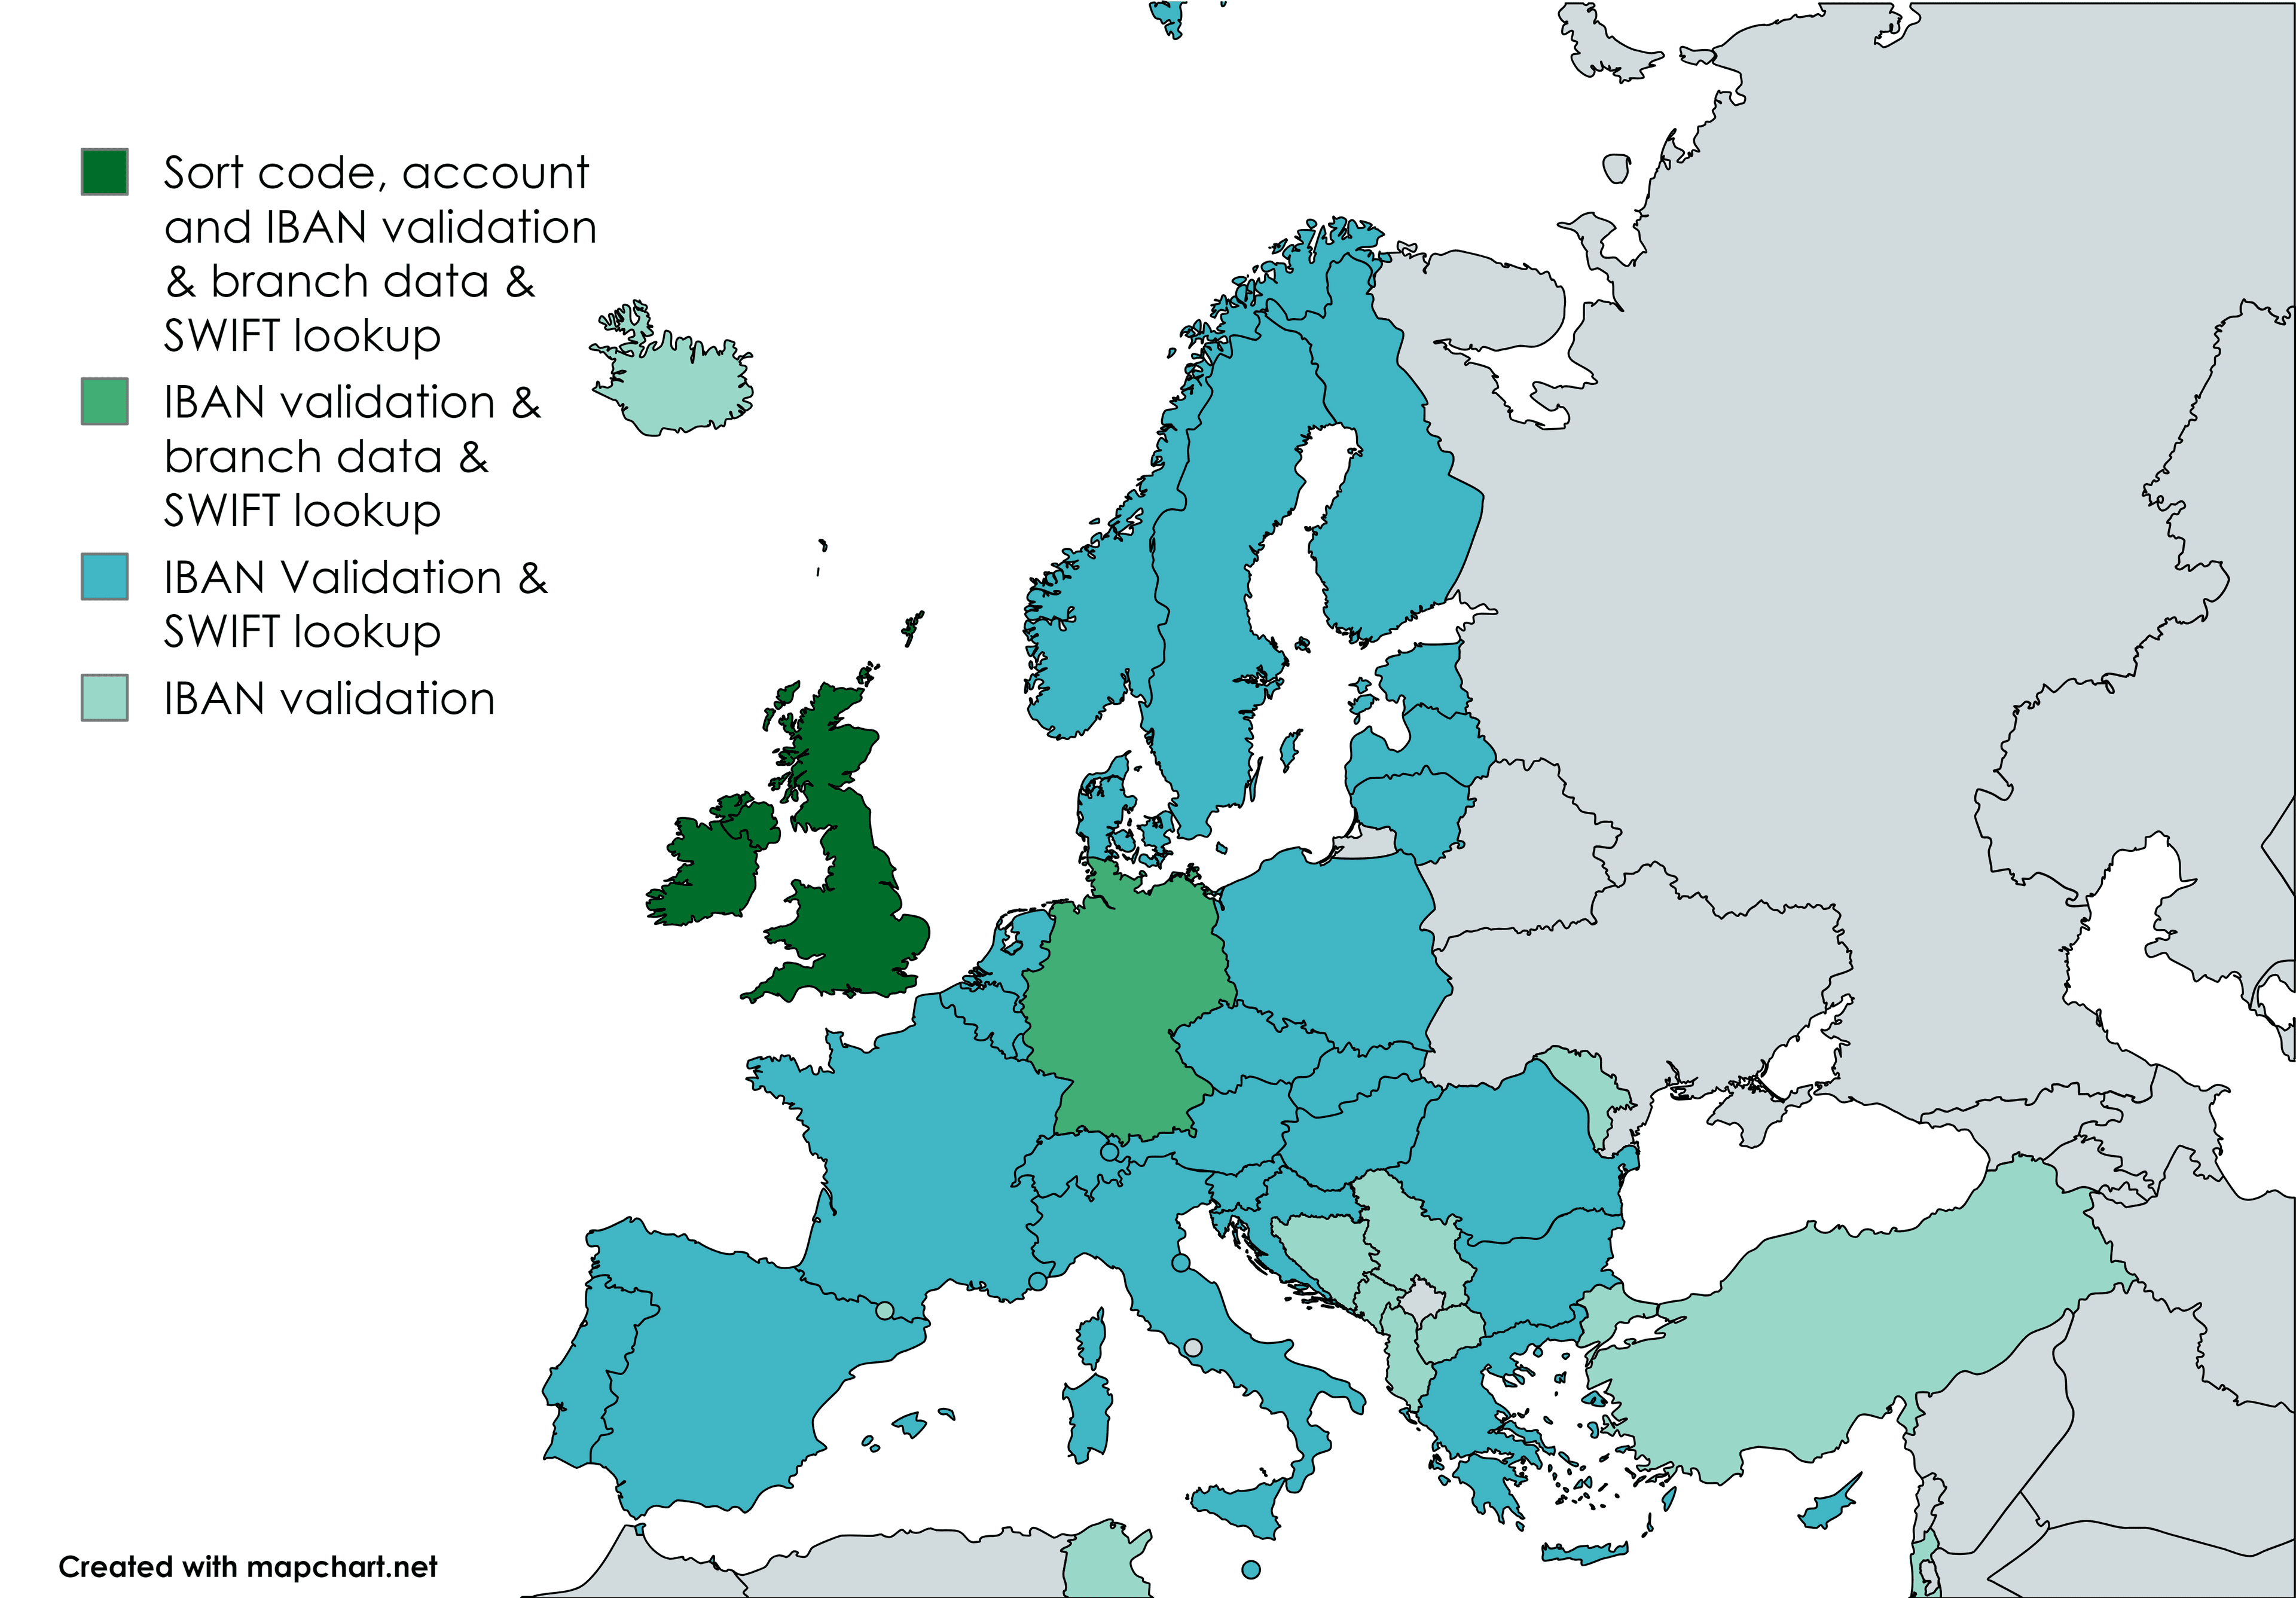 Mintly's coverage of European countries